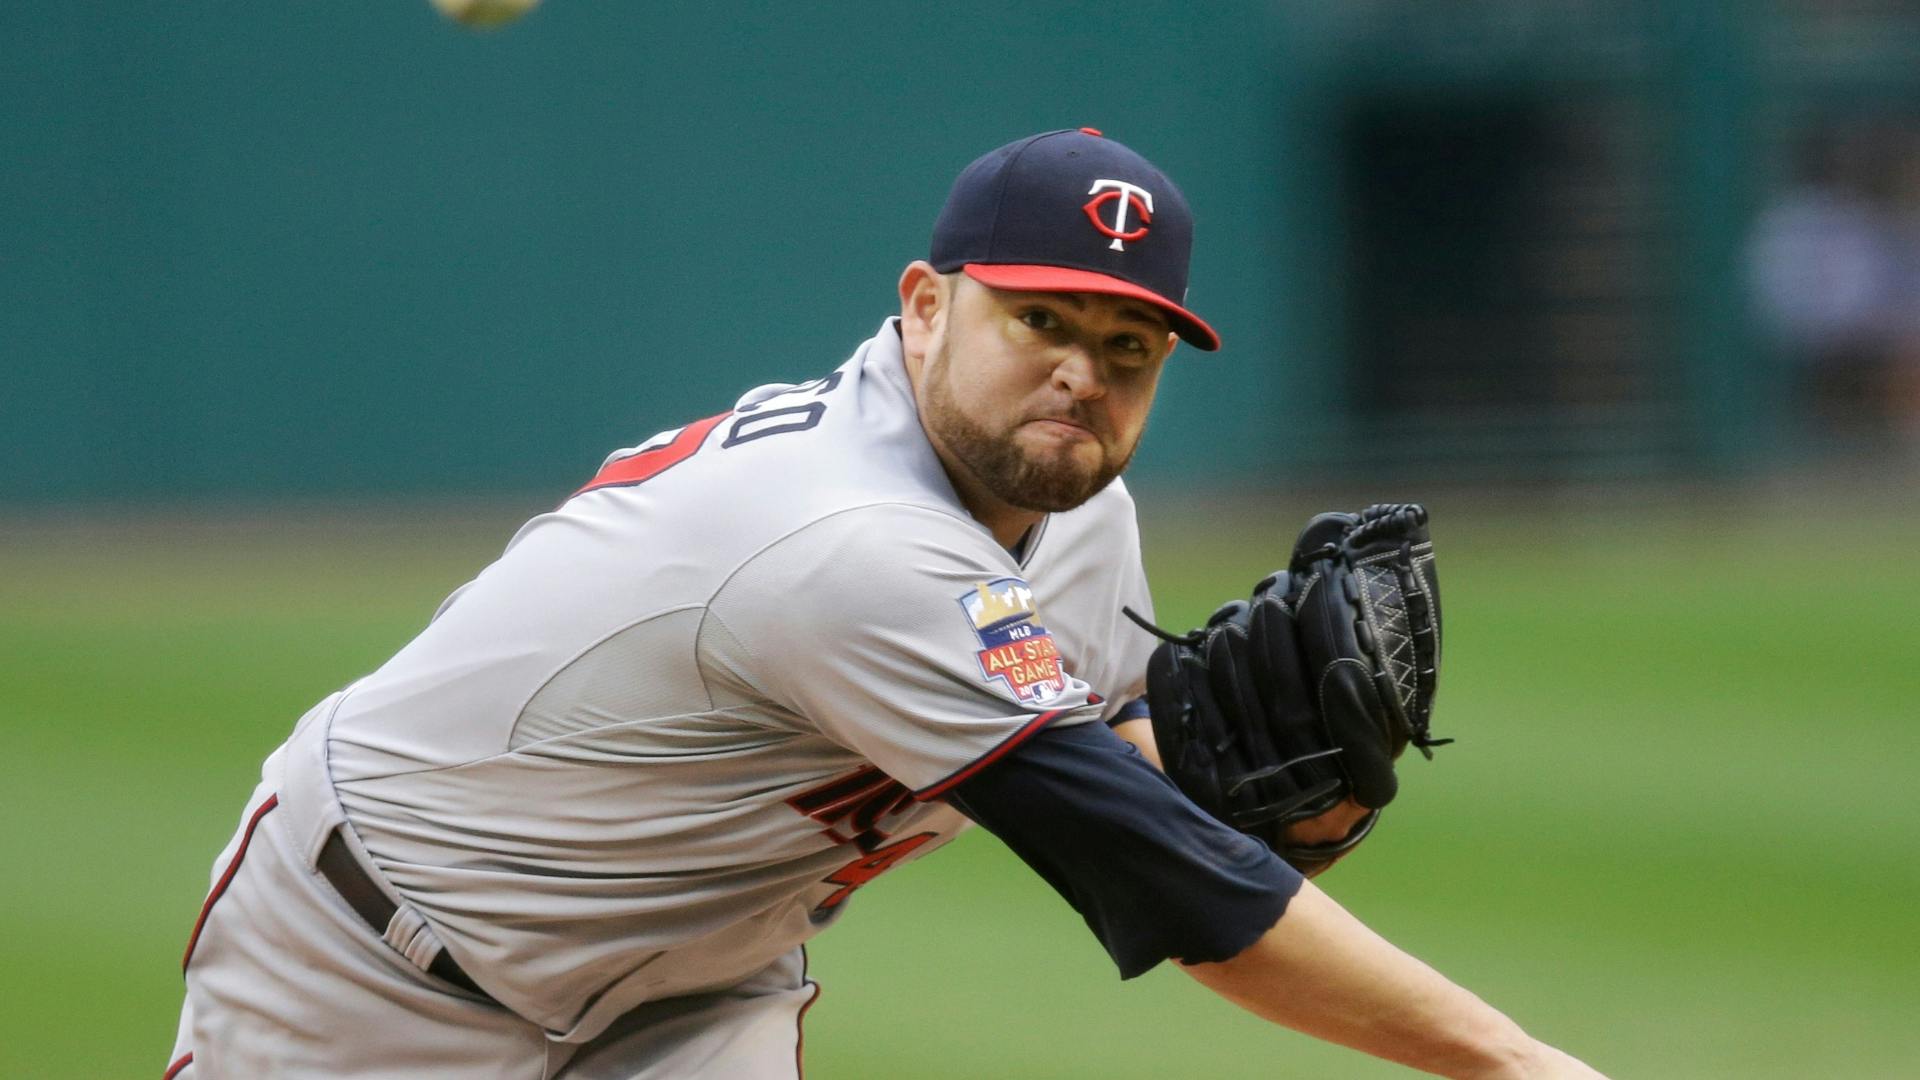 Twins hope Nolasco pitches all next year the way he did on Thursday